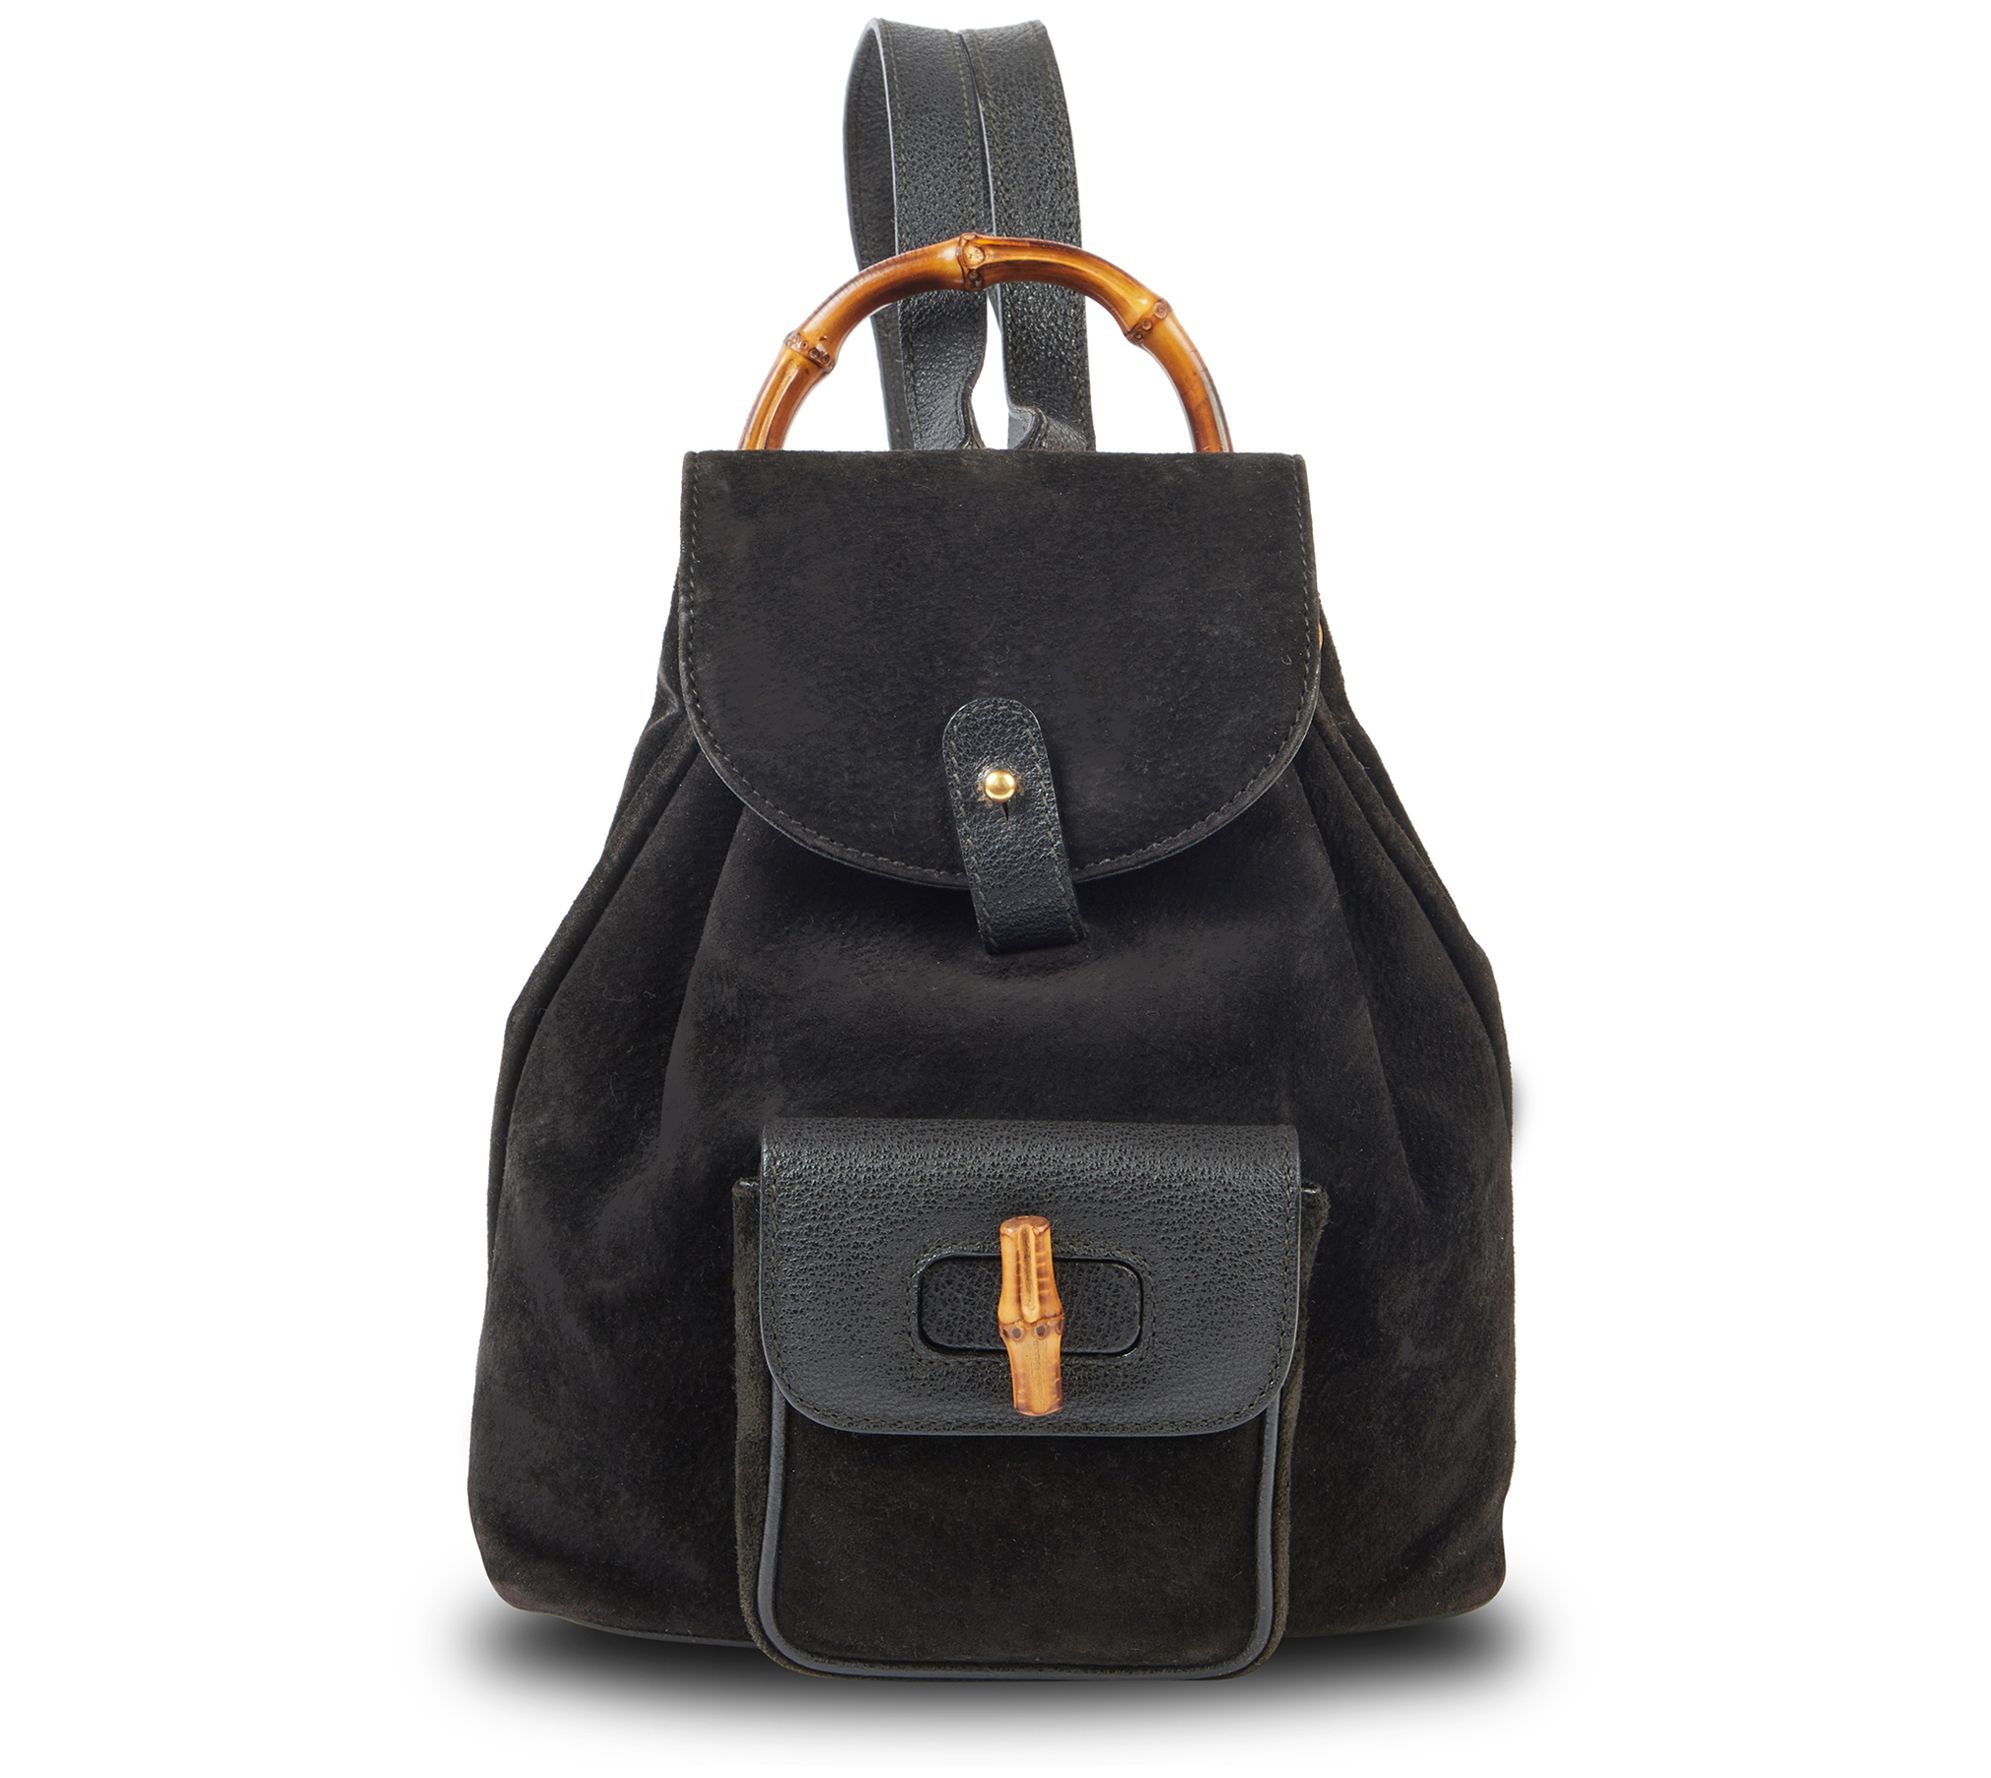 Pre-Owned Gucci Bamboo Suede Backpack - QVC.com